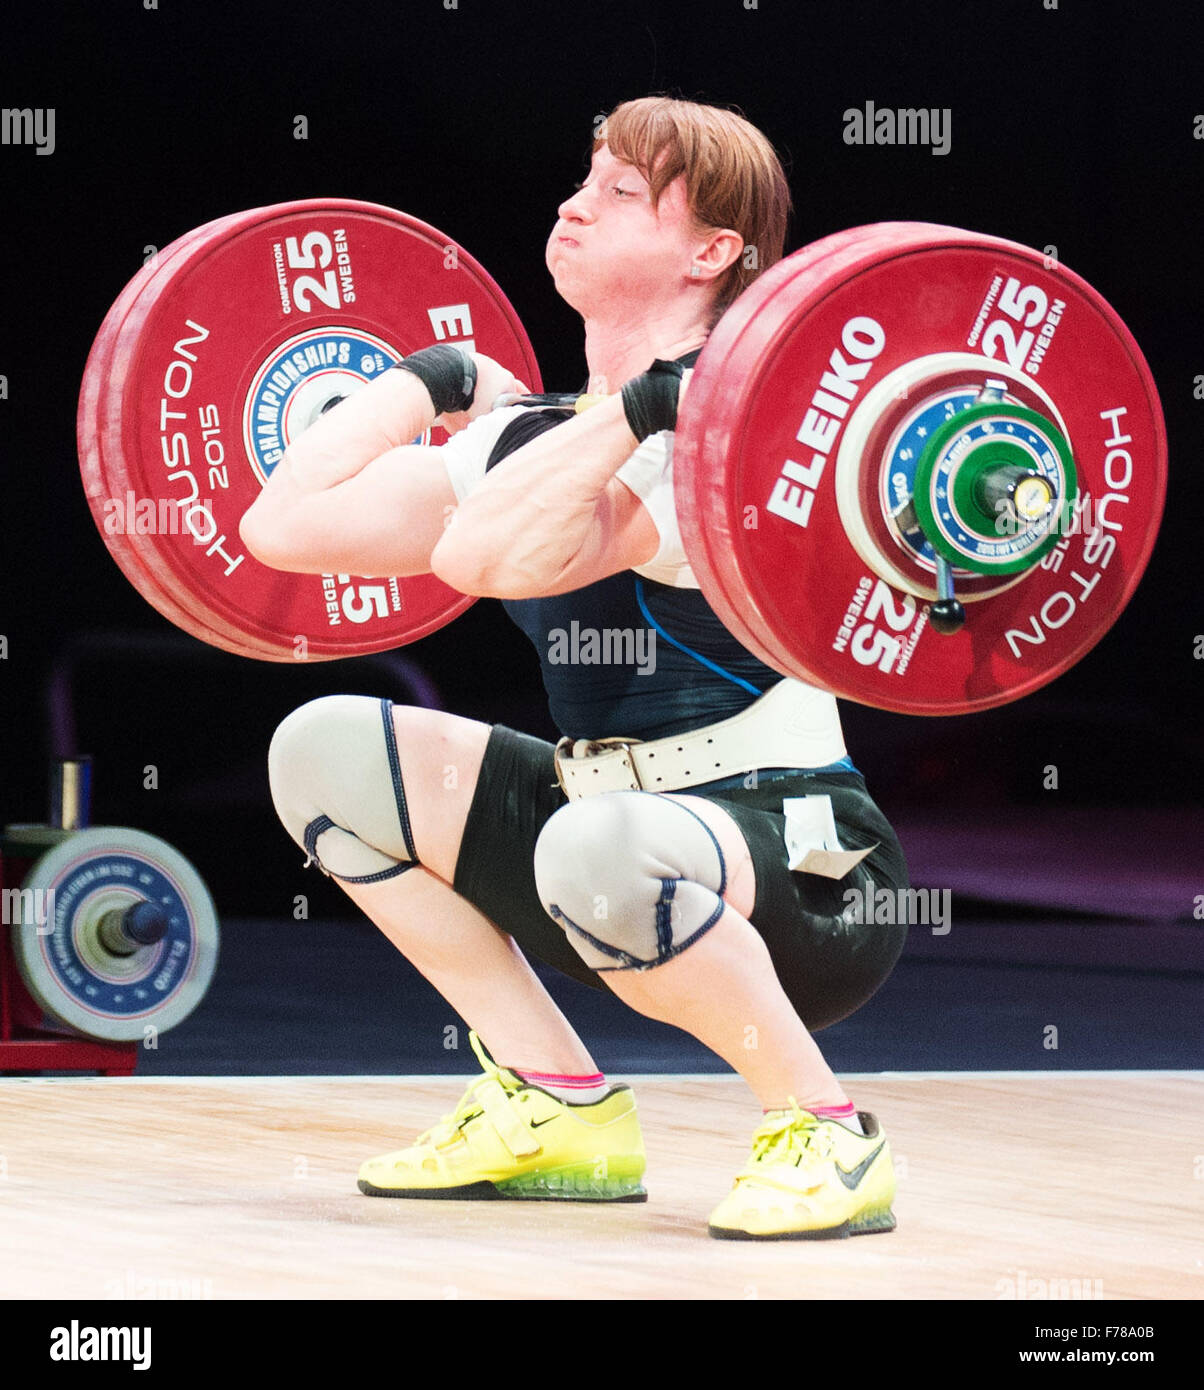 Houston, Texas, USA. 26th November, 2015. Anasstasiia Romanova wins the clean and jerk and total bronze medals in the Women's 69 kilograms at the World Weightlifting Chamionships in in Houston, Texas. Credit:  Brent Clark/Alamy Live News Stock Photo